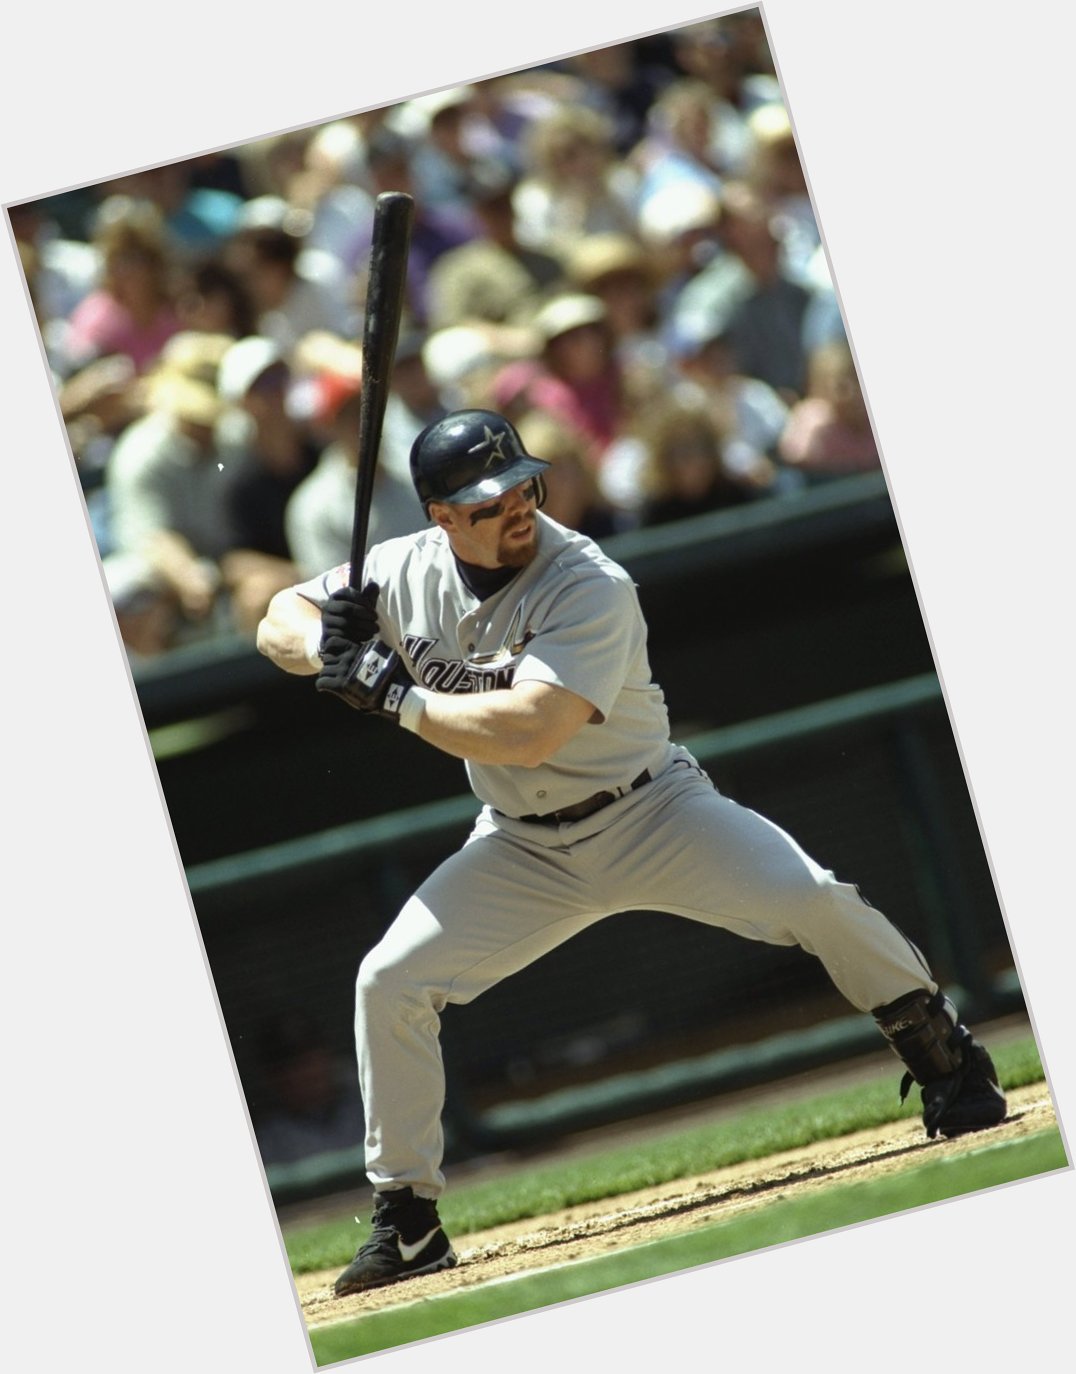 Jeff Bagwell is the only player from 1996-2001 to have 30+ HR, 100+ RBI, 100+ R each year.

Happy birthday, Jeff! 